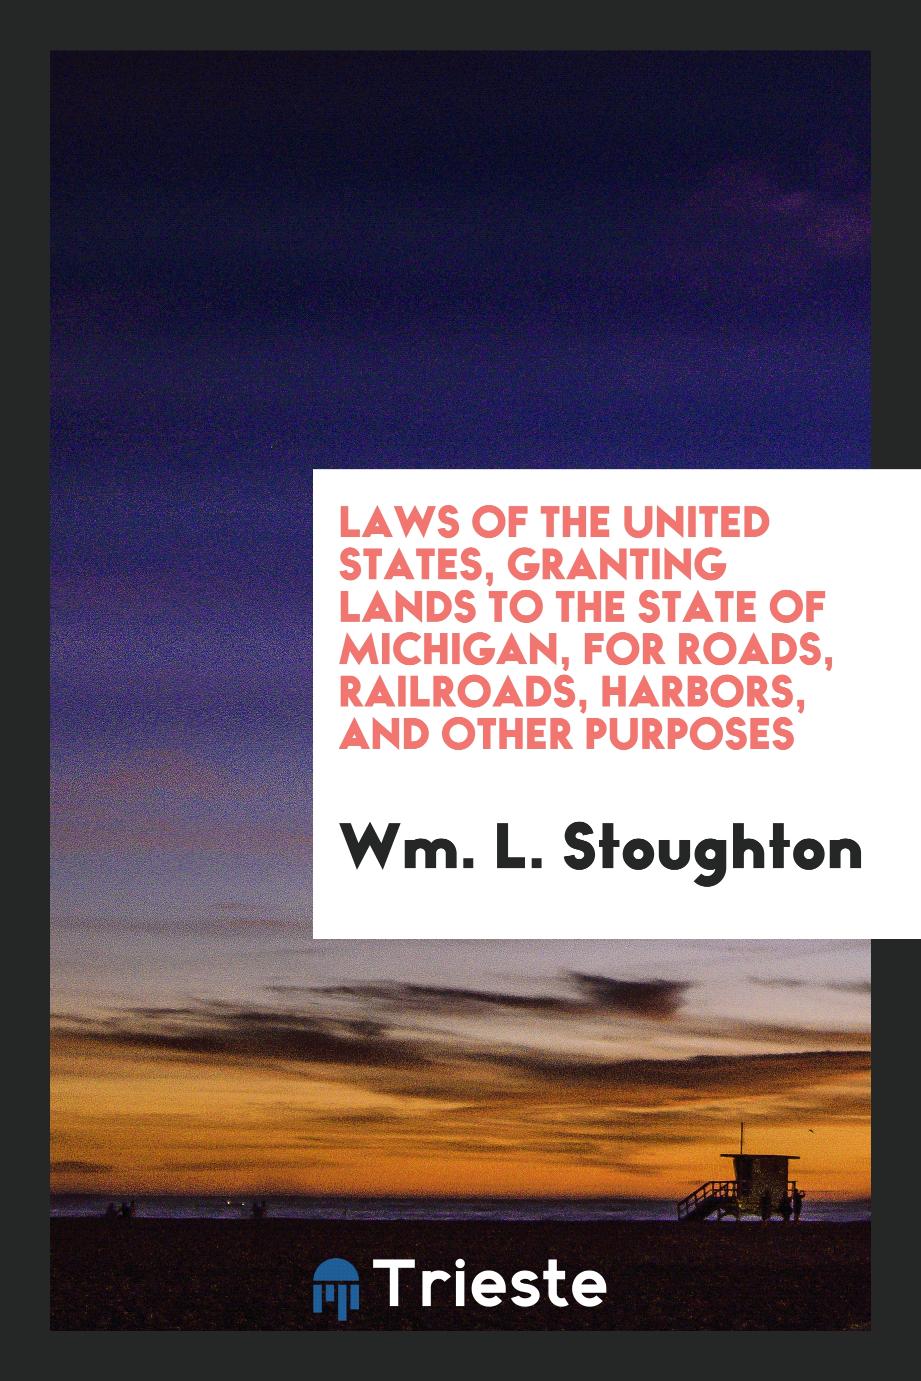 Laws of the United States, Granting Lands to the State of Michigan, for Roads, Railroads, Harbors, and Other Purposes